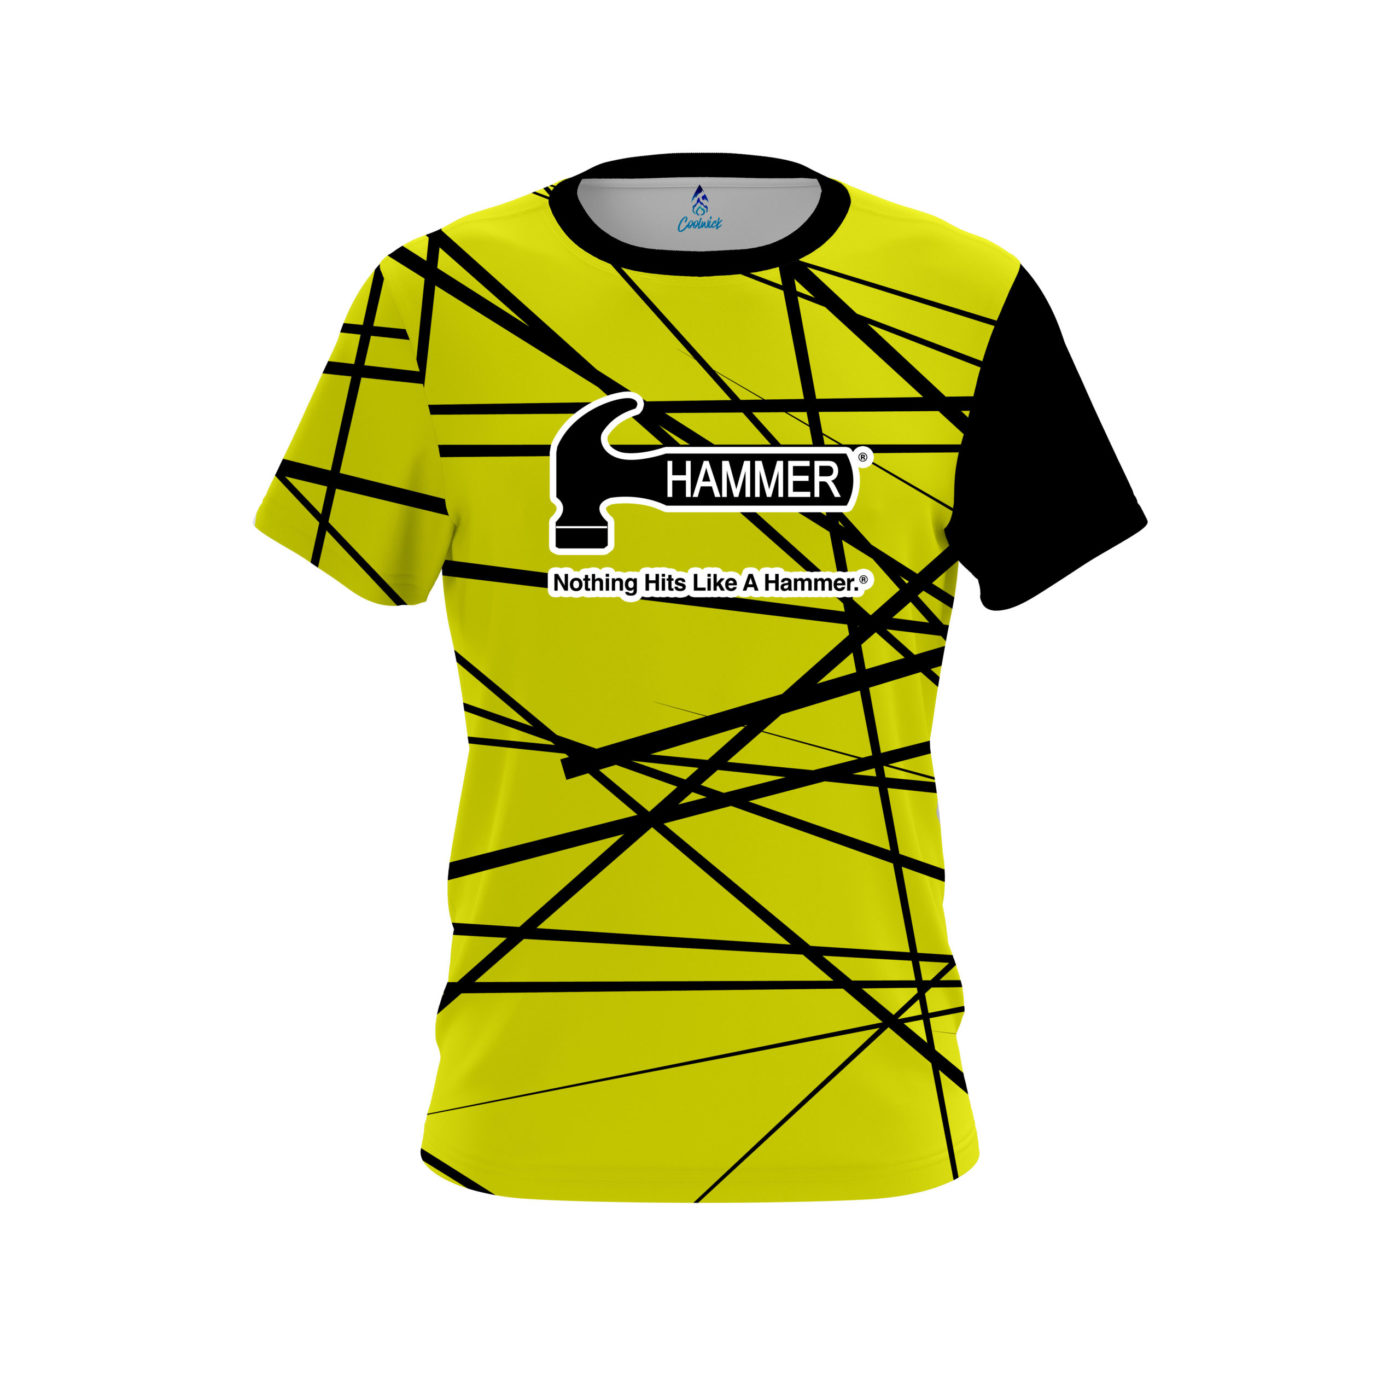 Hammer Distracted Yellow CoolWick Bowling Jersey Questions & Answers